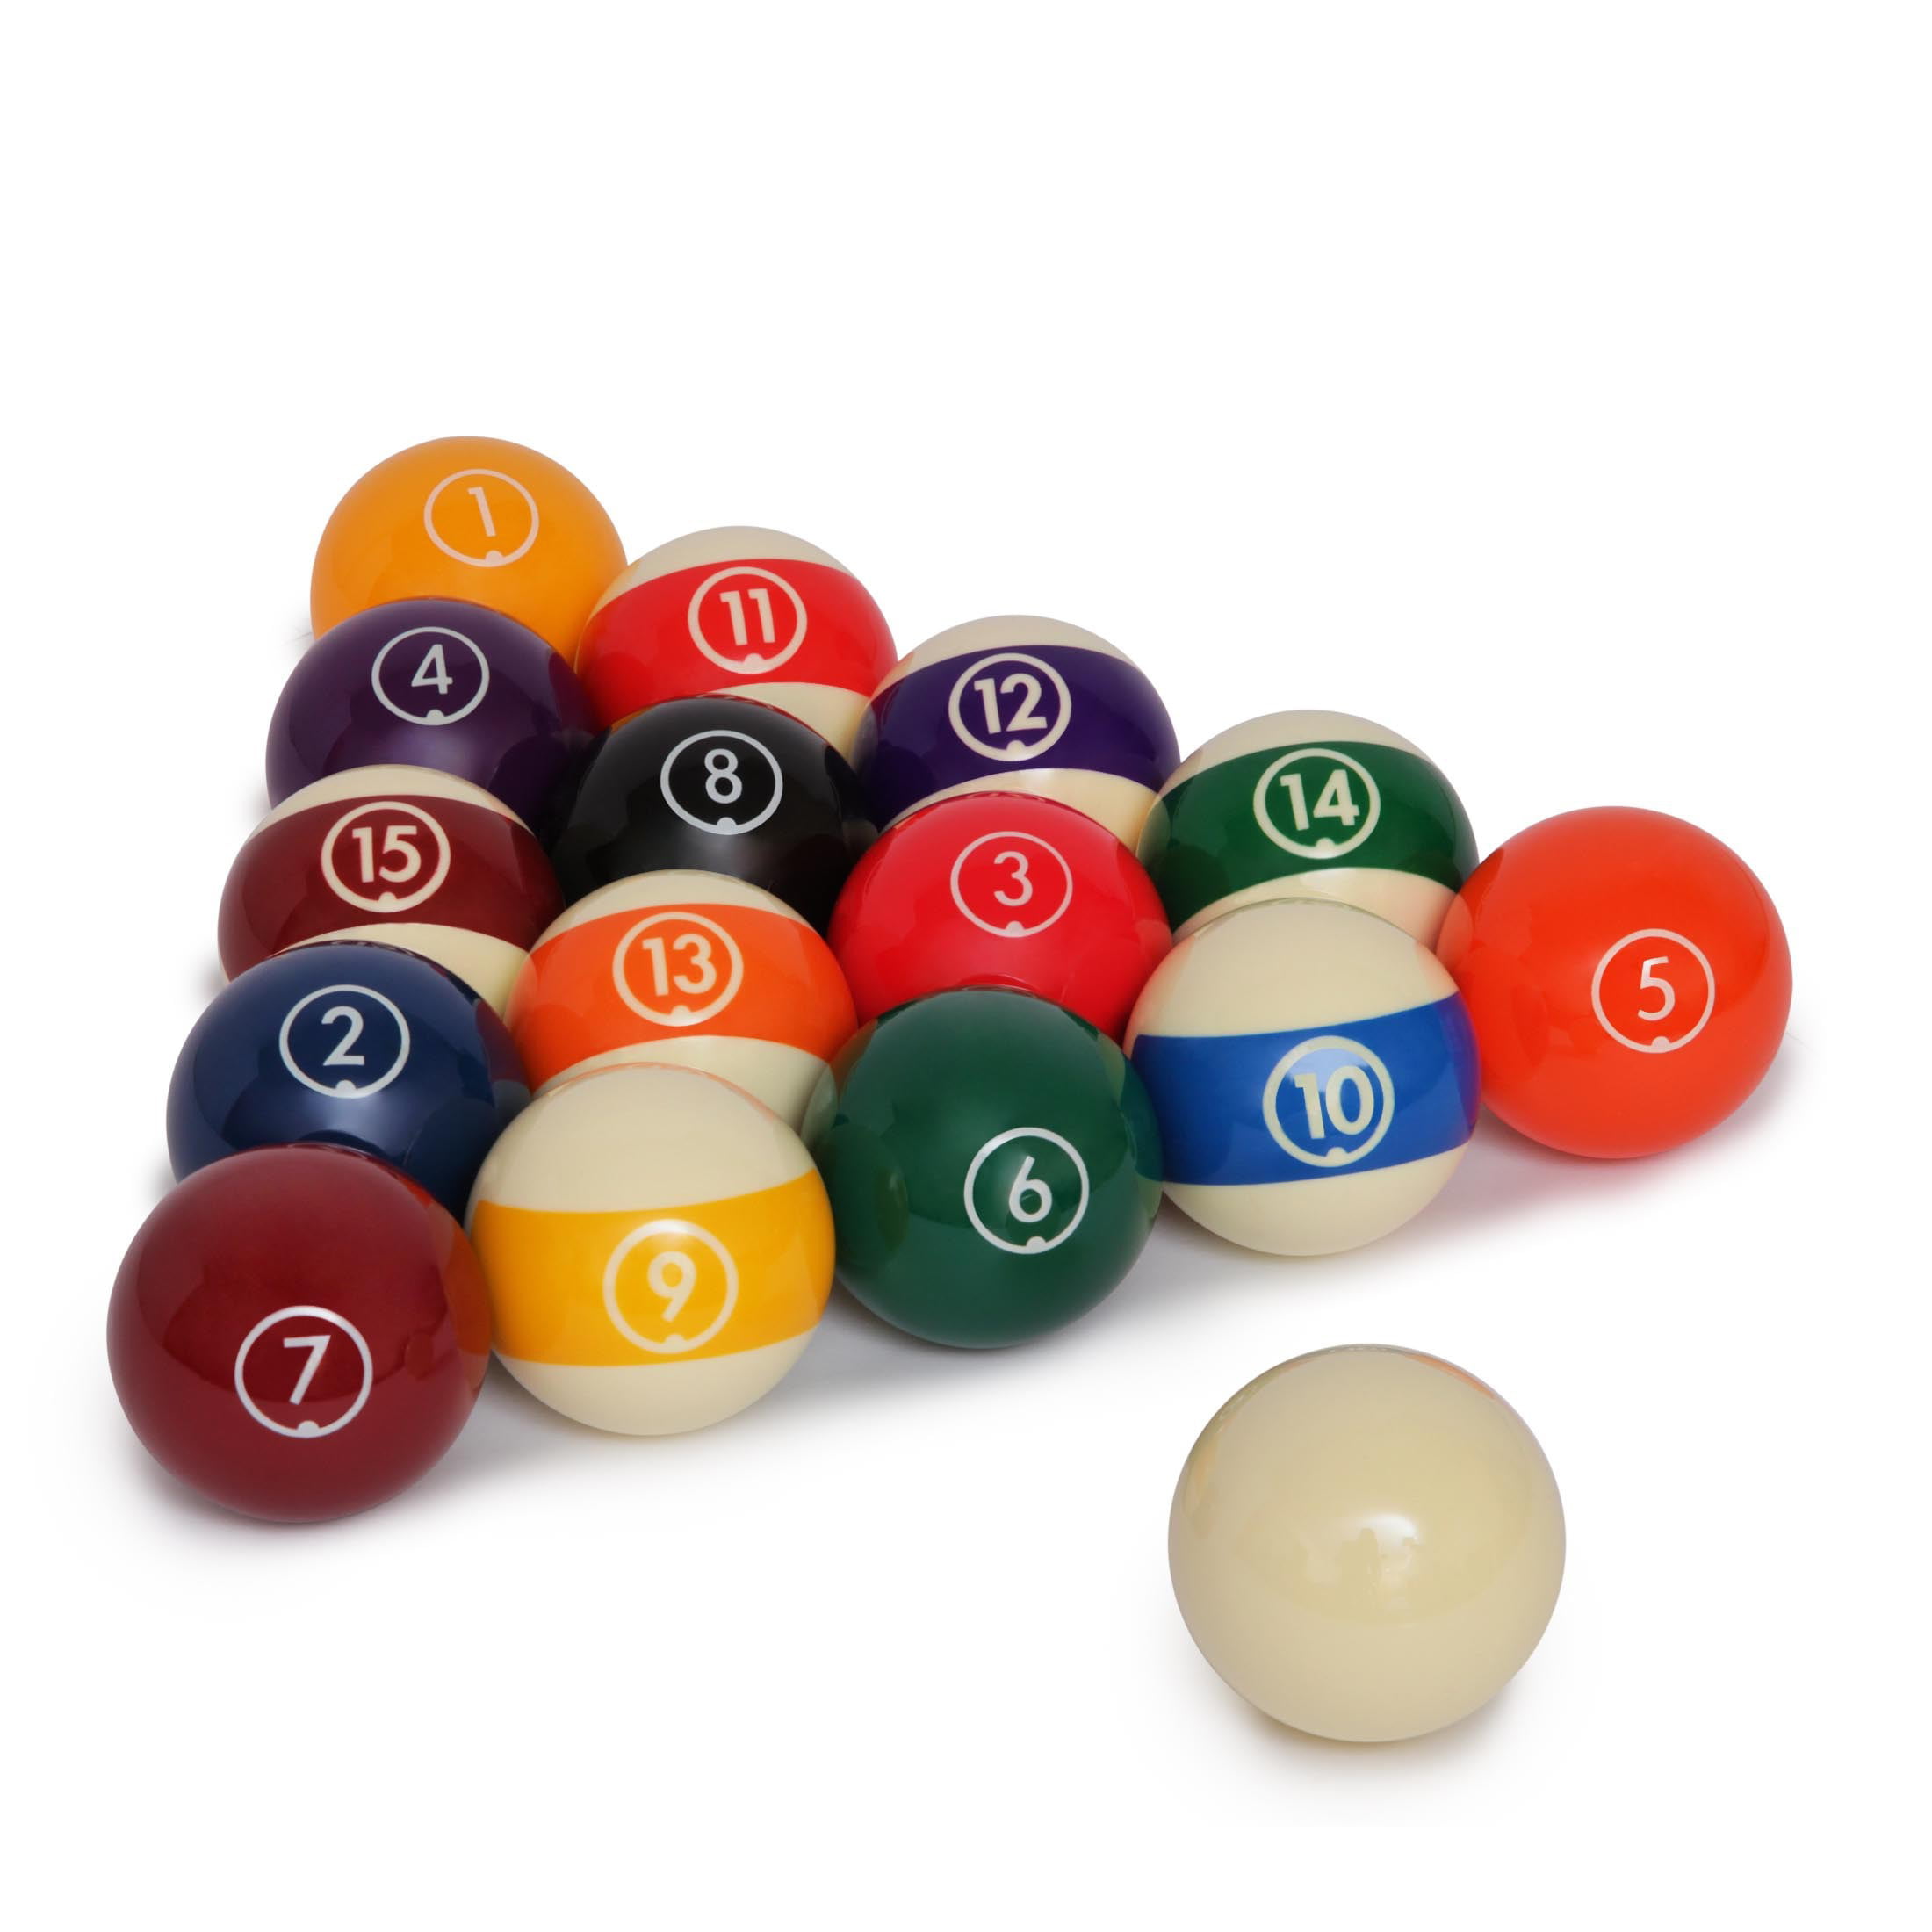 Full Set 16 Pool Balls Delta Deluxe Ball set w/ Blue Dot Cue Ball Size 2-1/4 in 